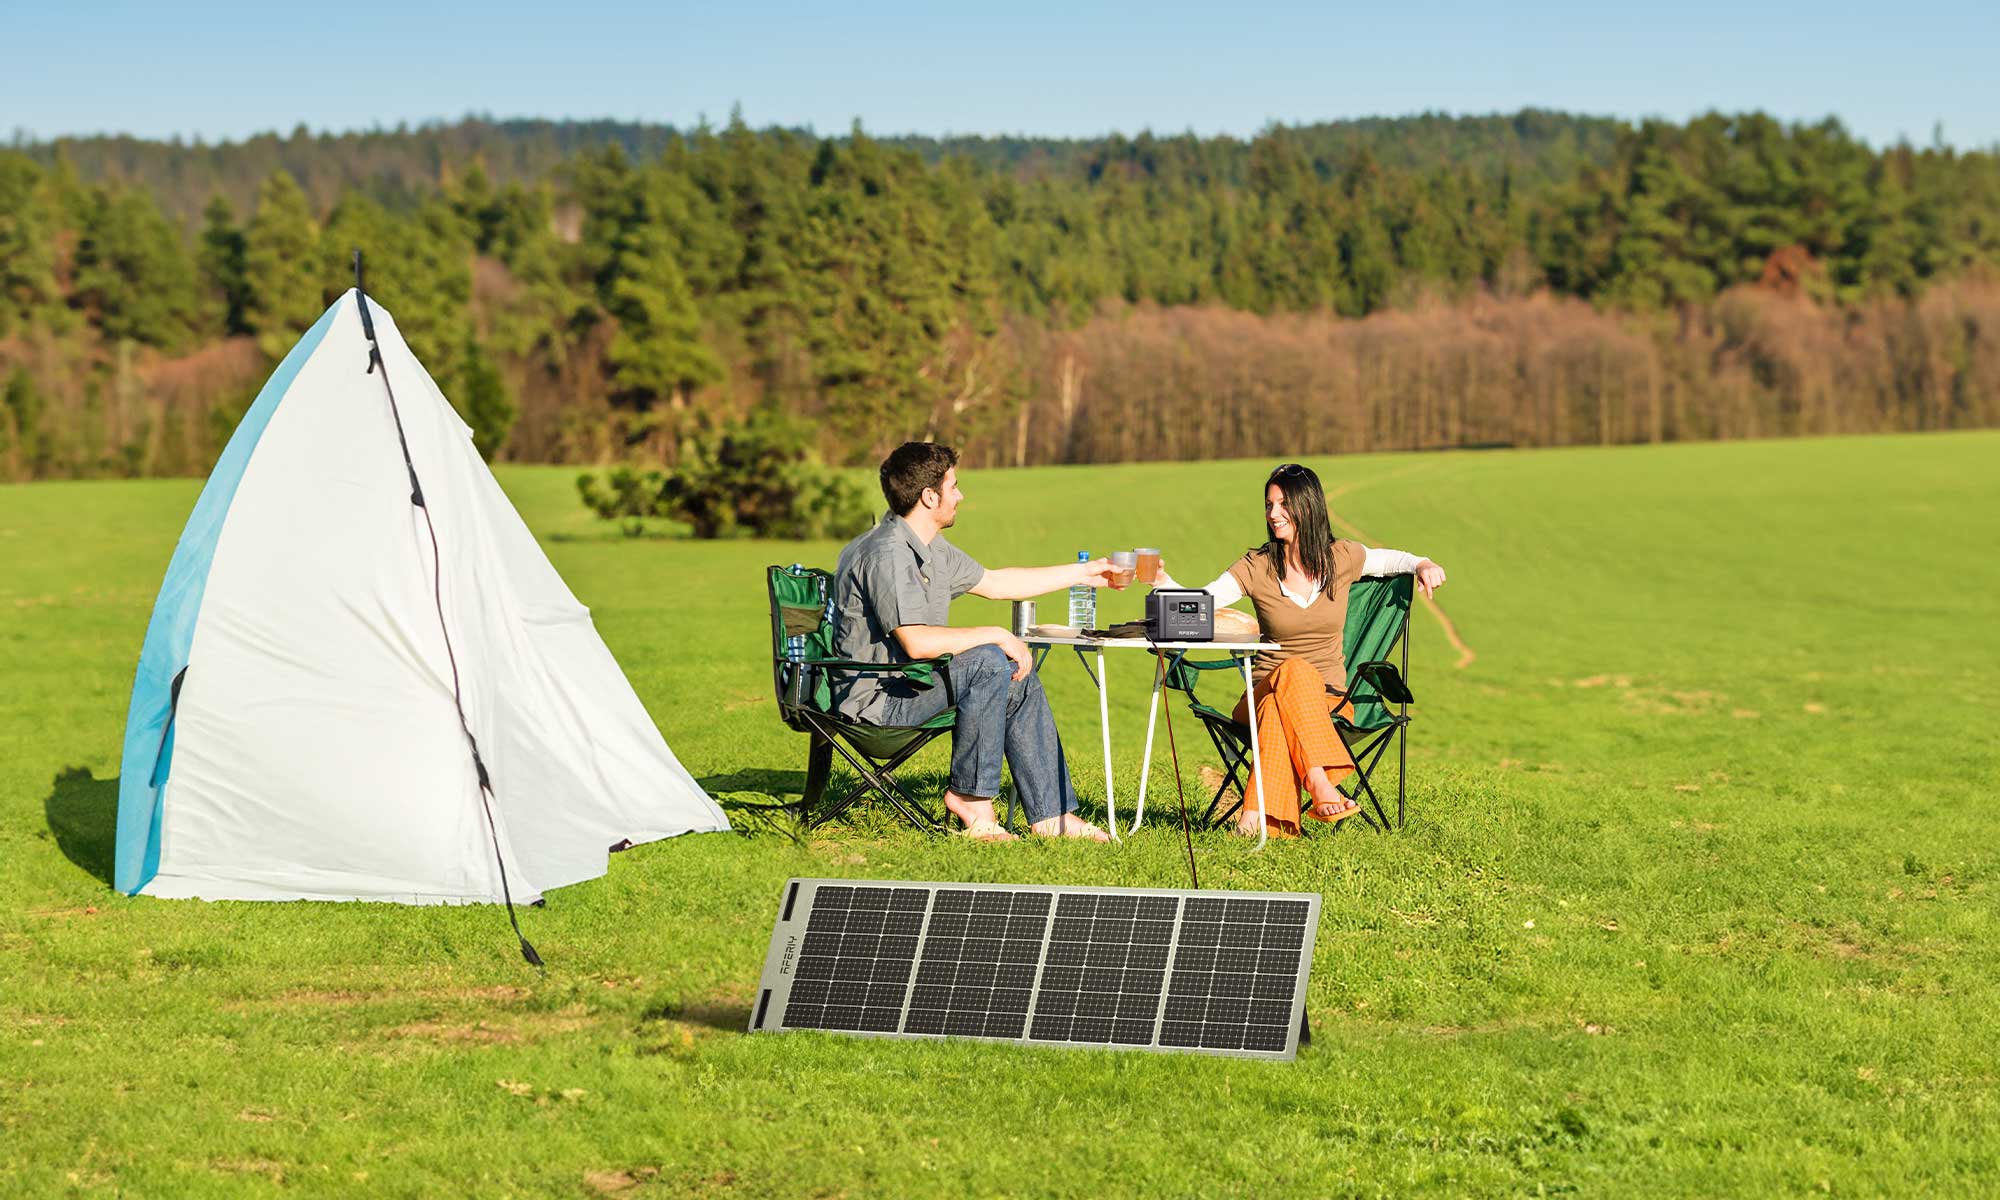 Camping solar panels are designed for outdoor activities, such as camping, hiking, and caravanning.